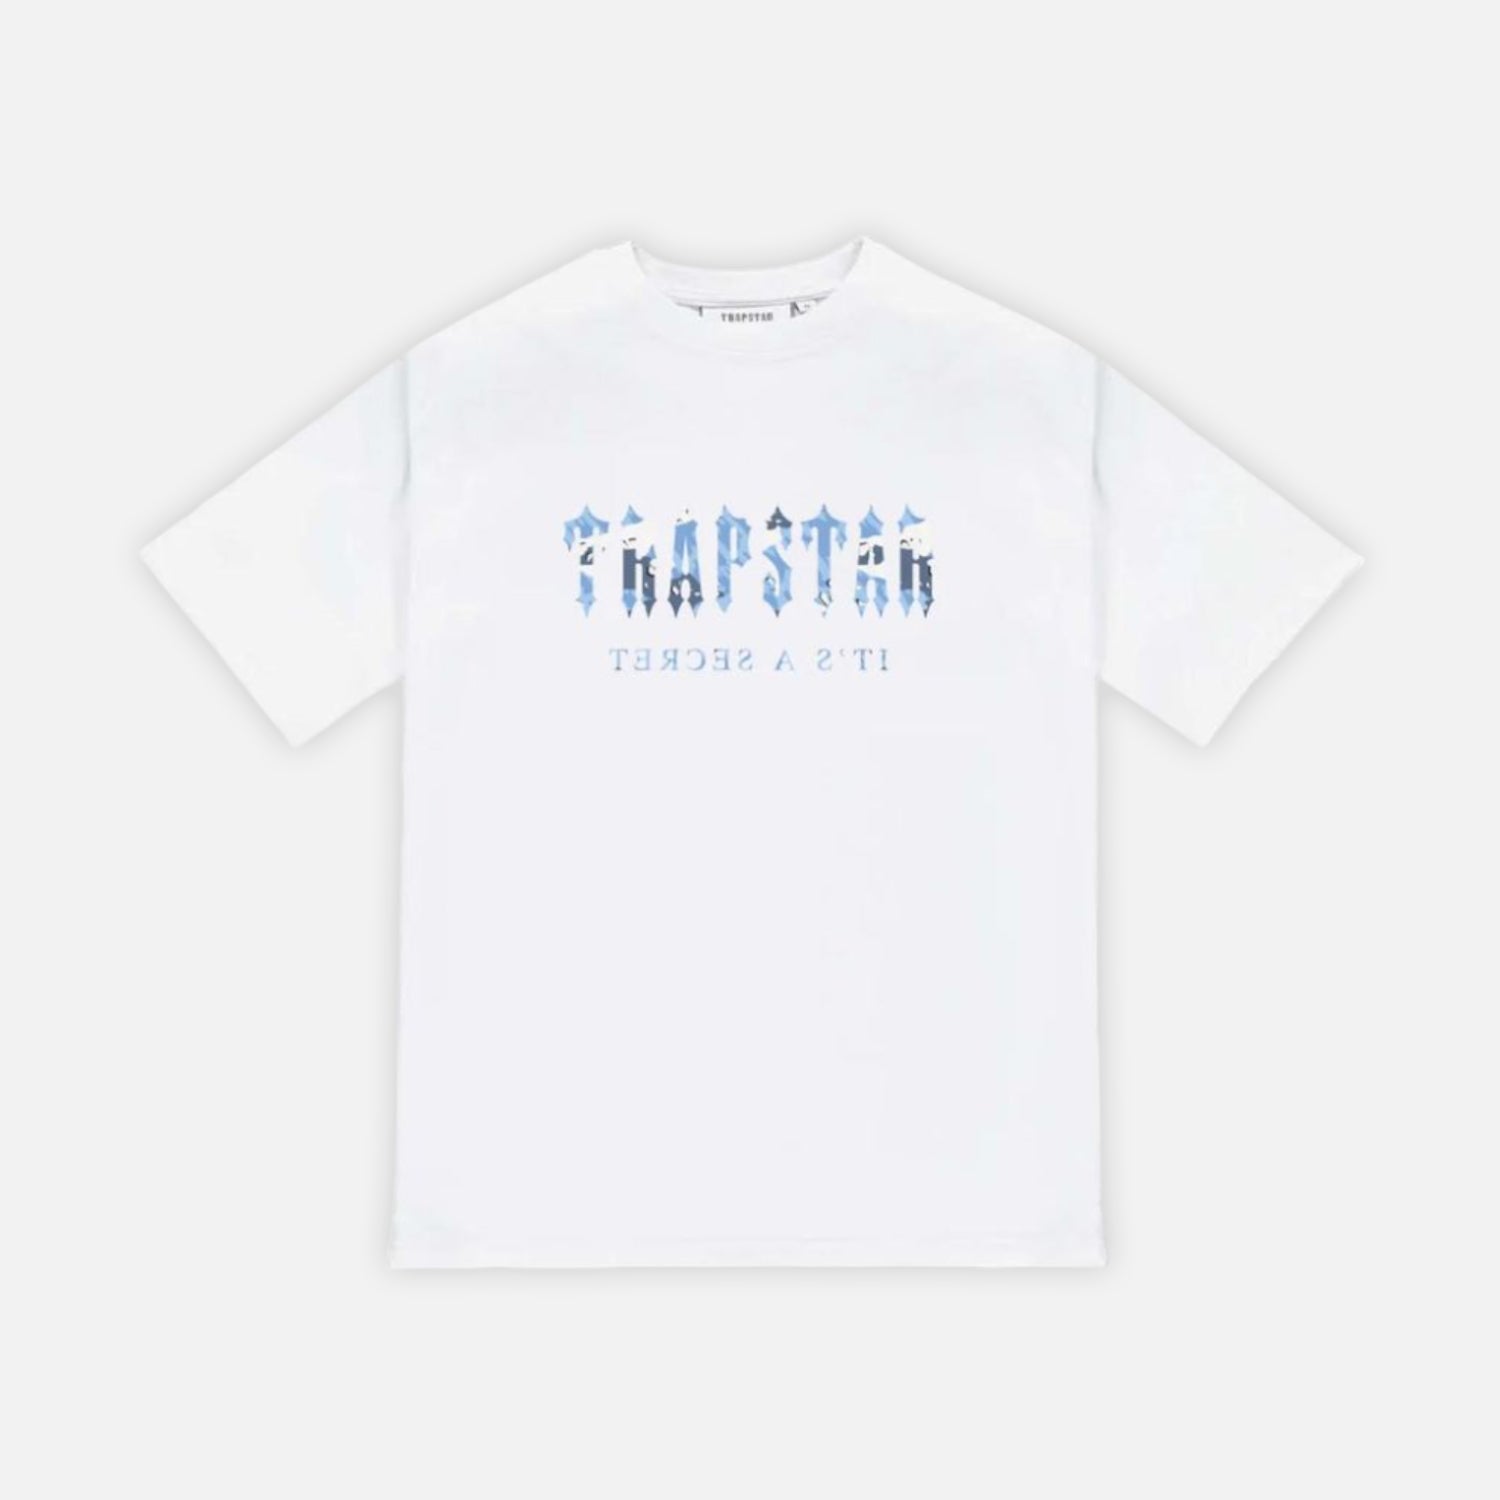 Trapstar Decoded T-Shirt - White / Blue Camo